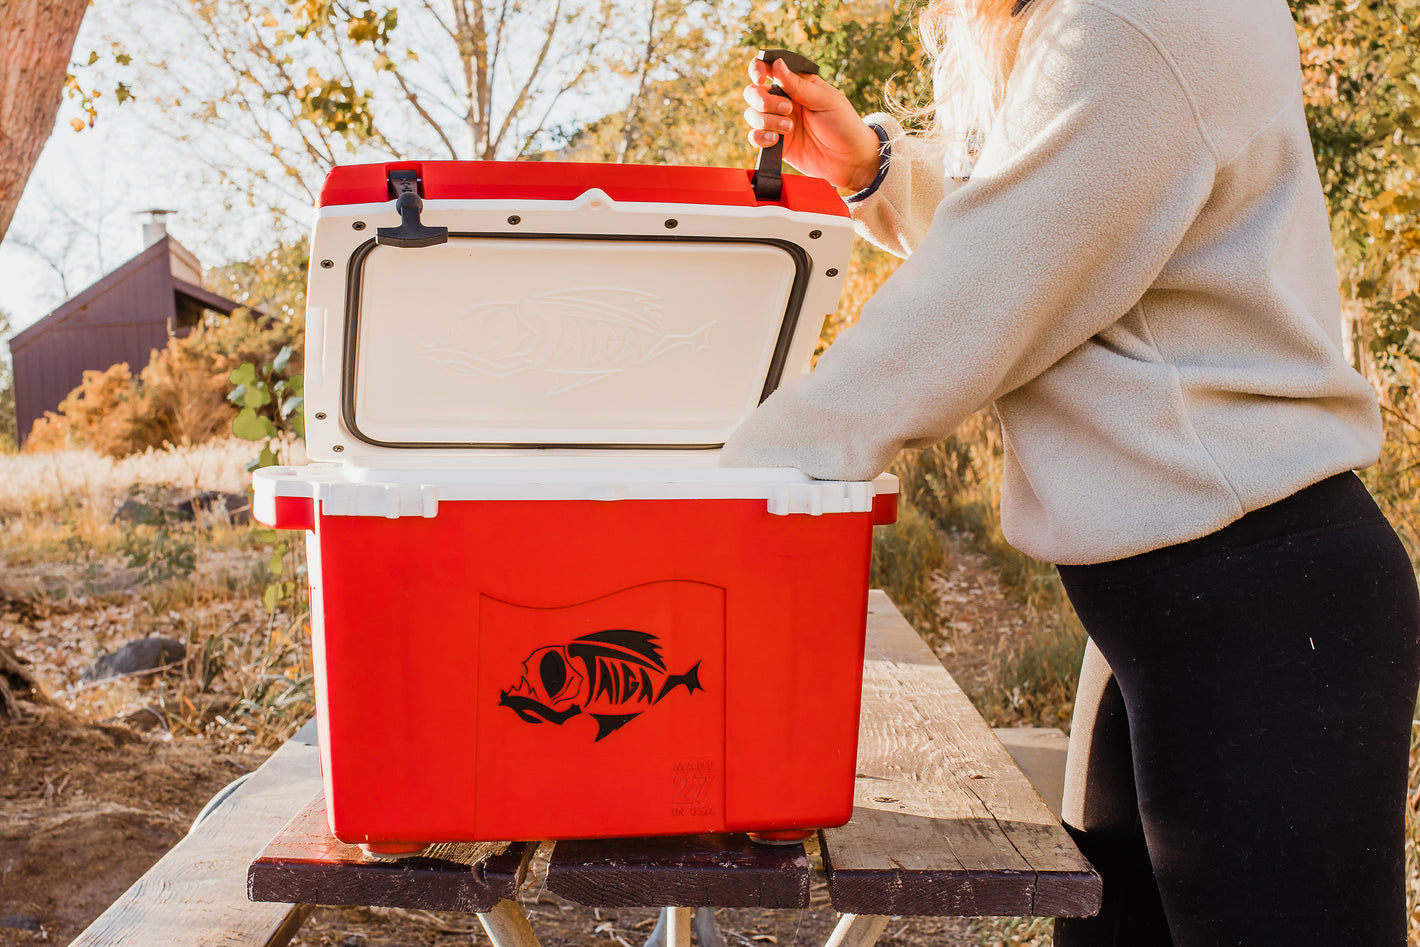 Taiga red 27 quart cooler in state park